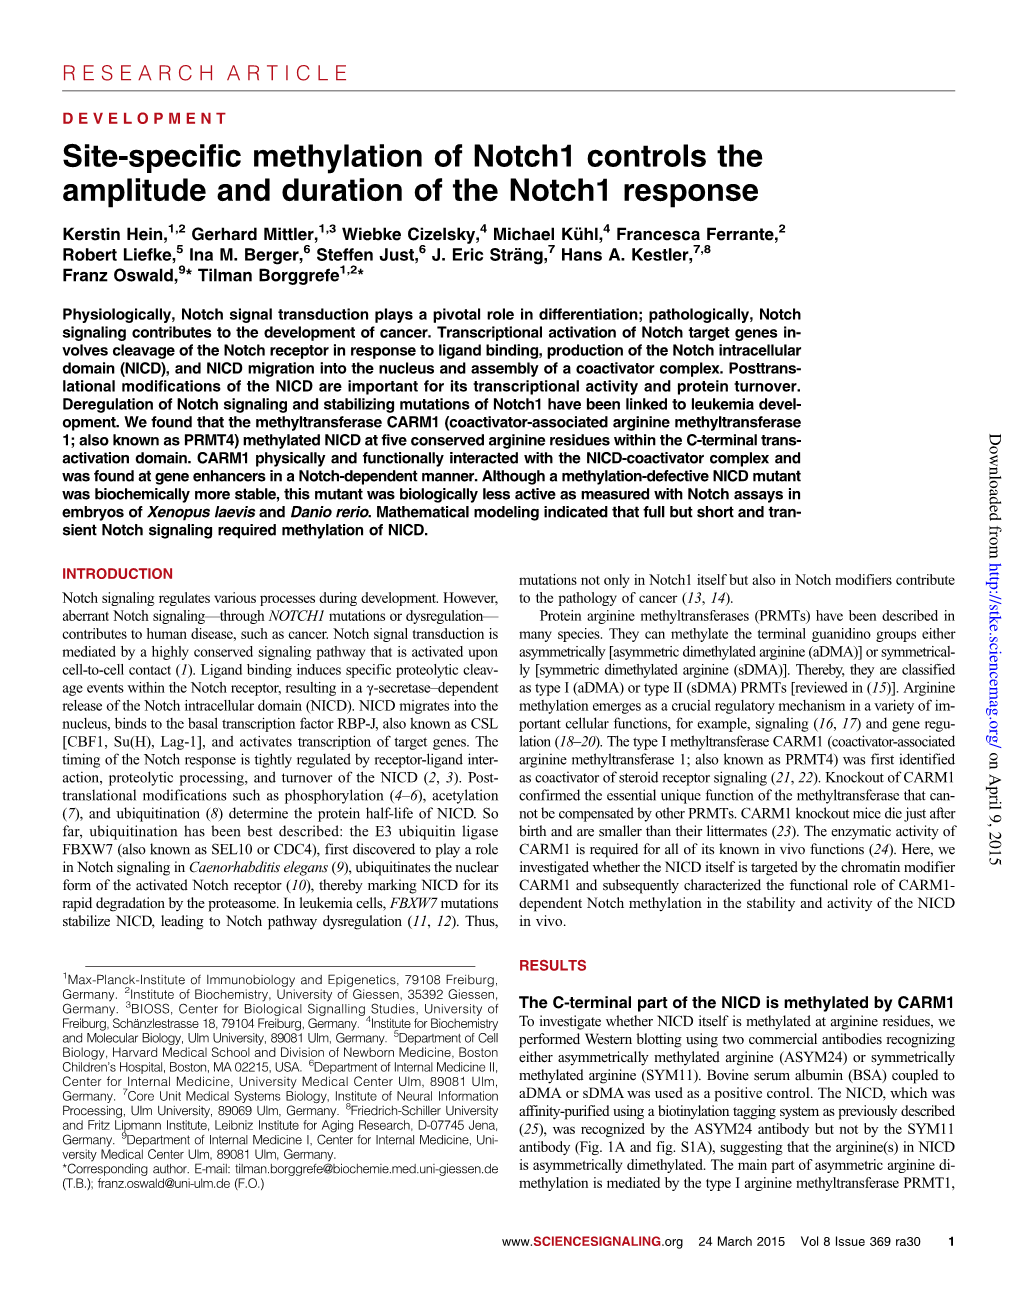 Site-Specific Methylation of Notch1 Controls the Amplitude and Duration of the Notch1 Response